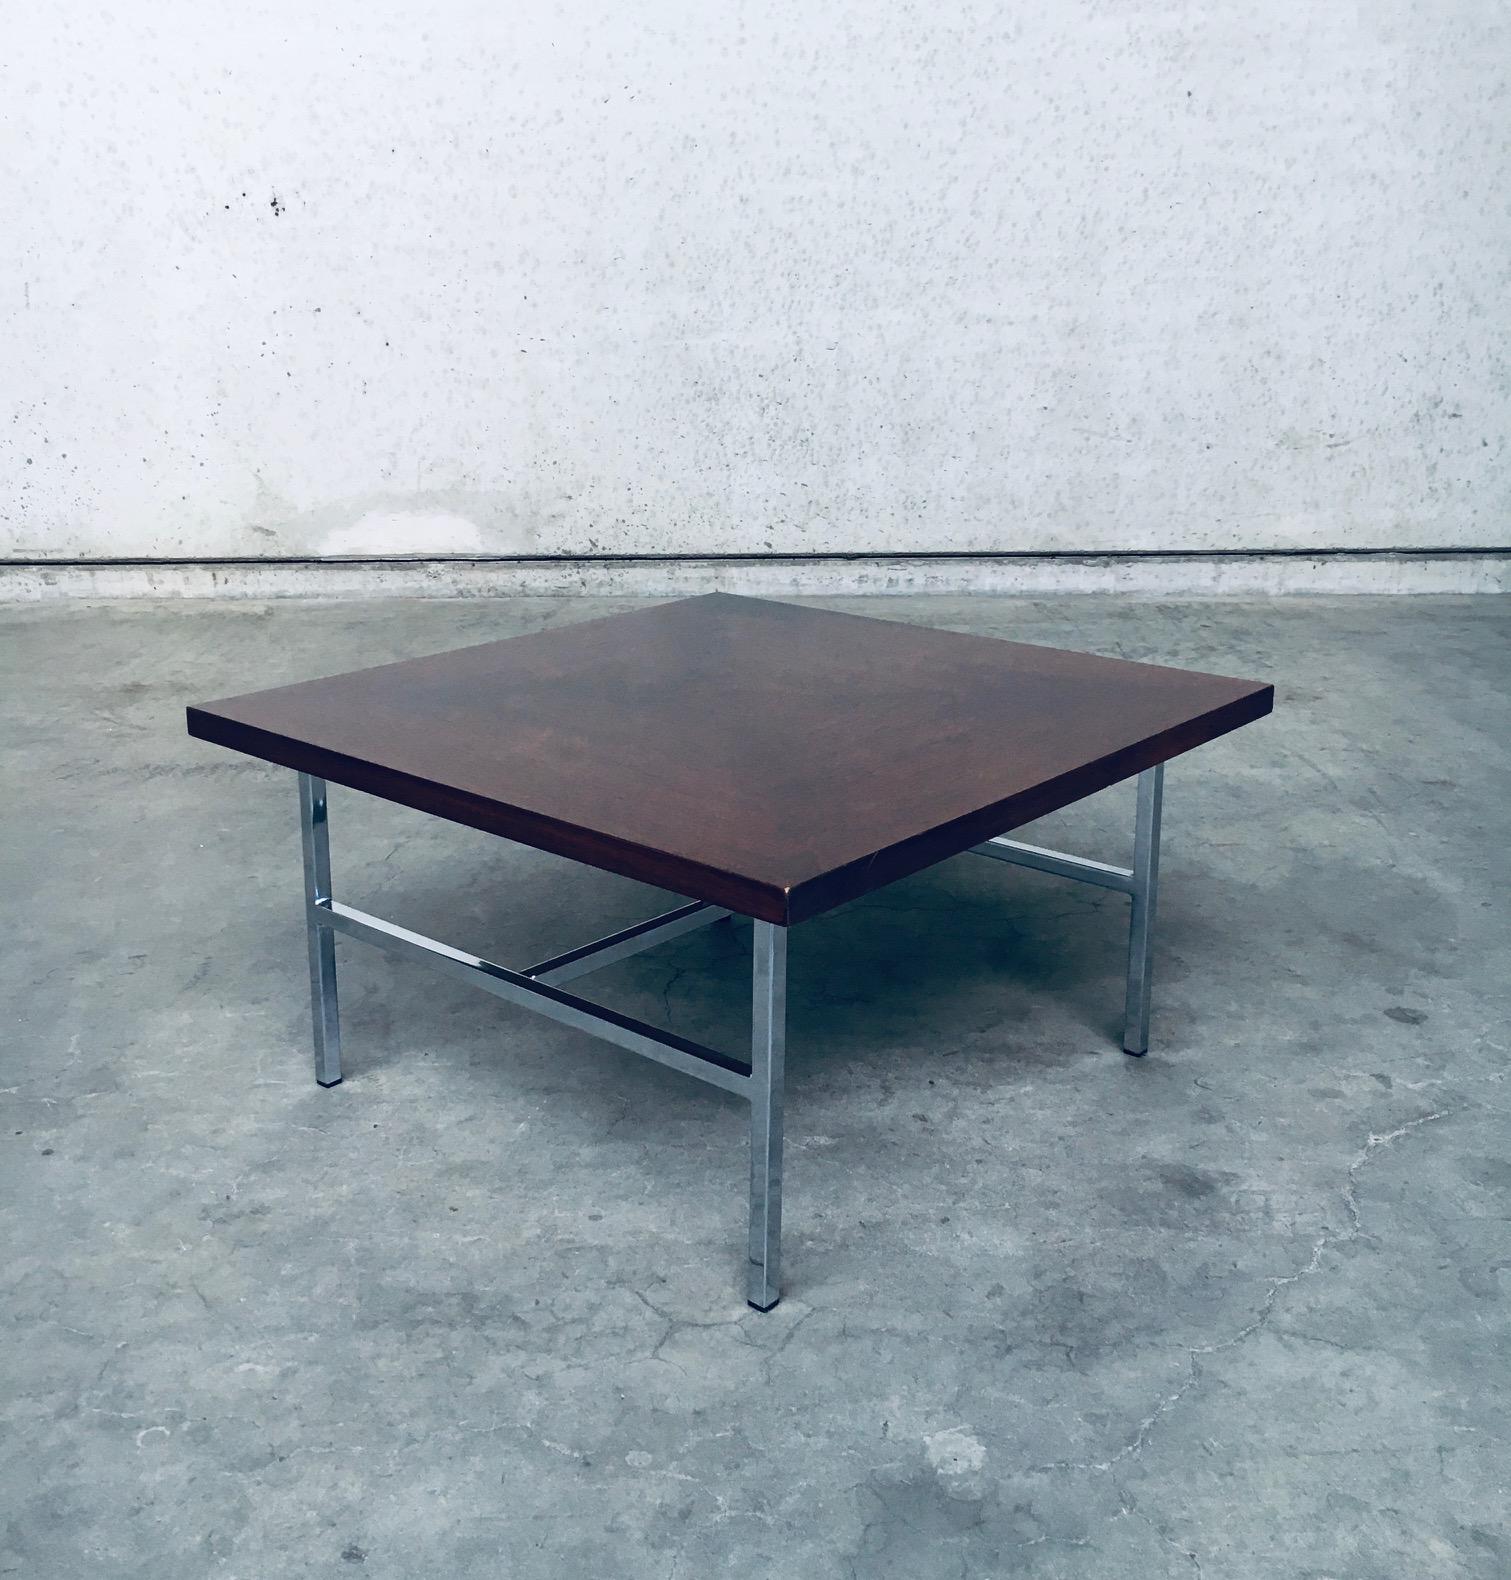 Midcentury Dutch Design Coffee Table, Netherlands 1960's For Sale 1